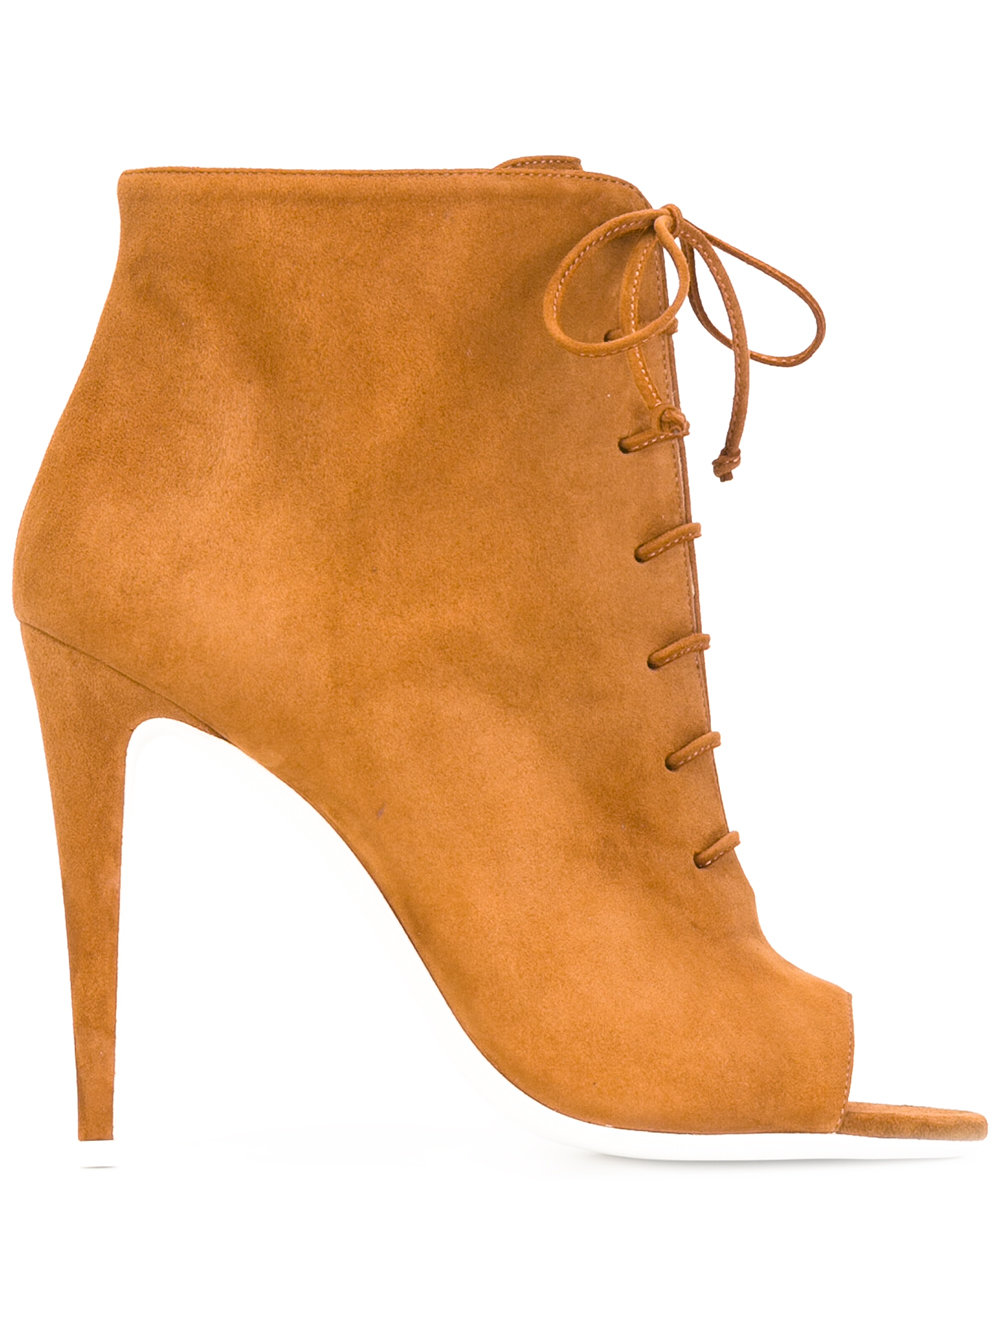 Off-White Carry Over boots Light Brown Women Shoes